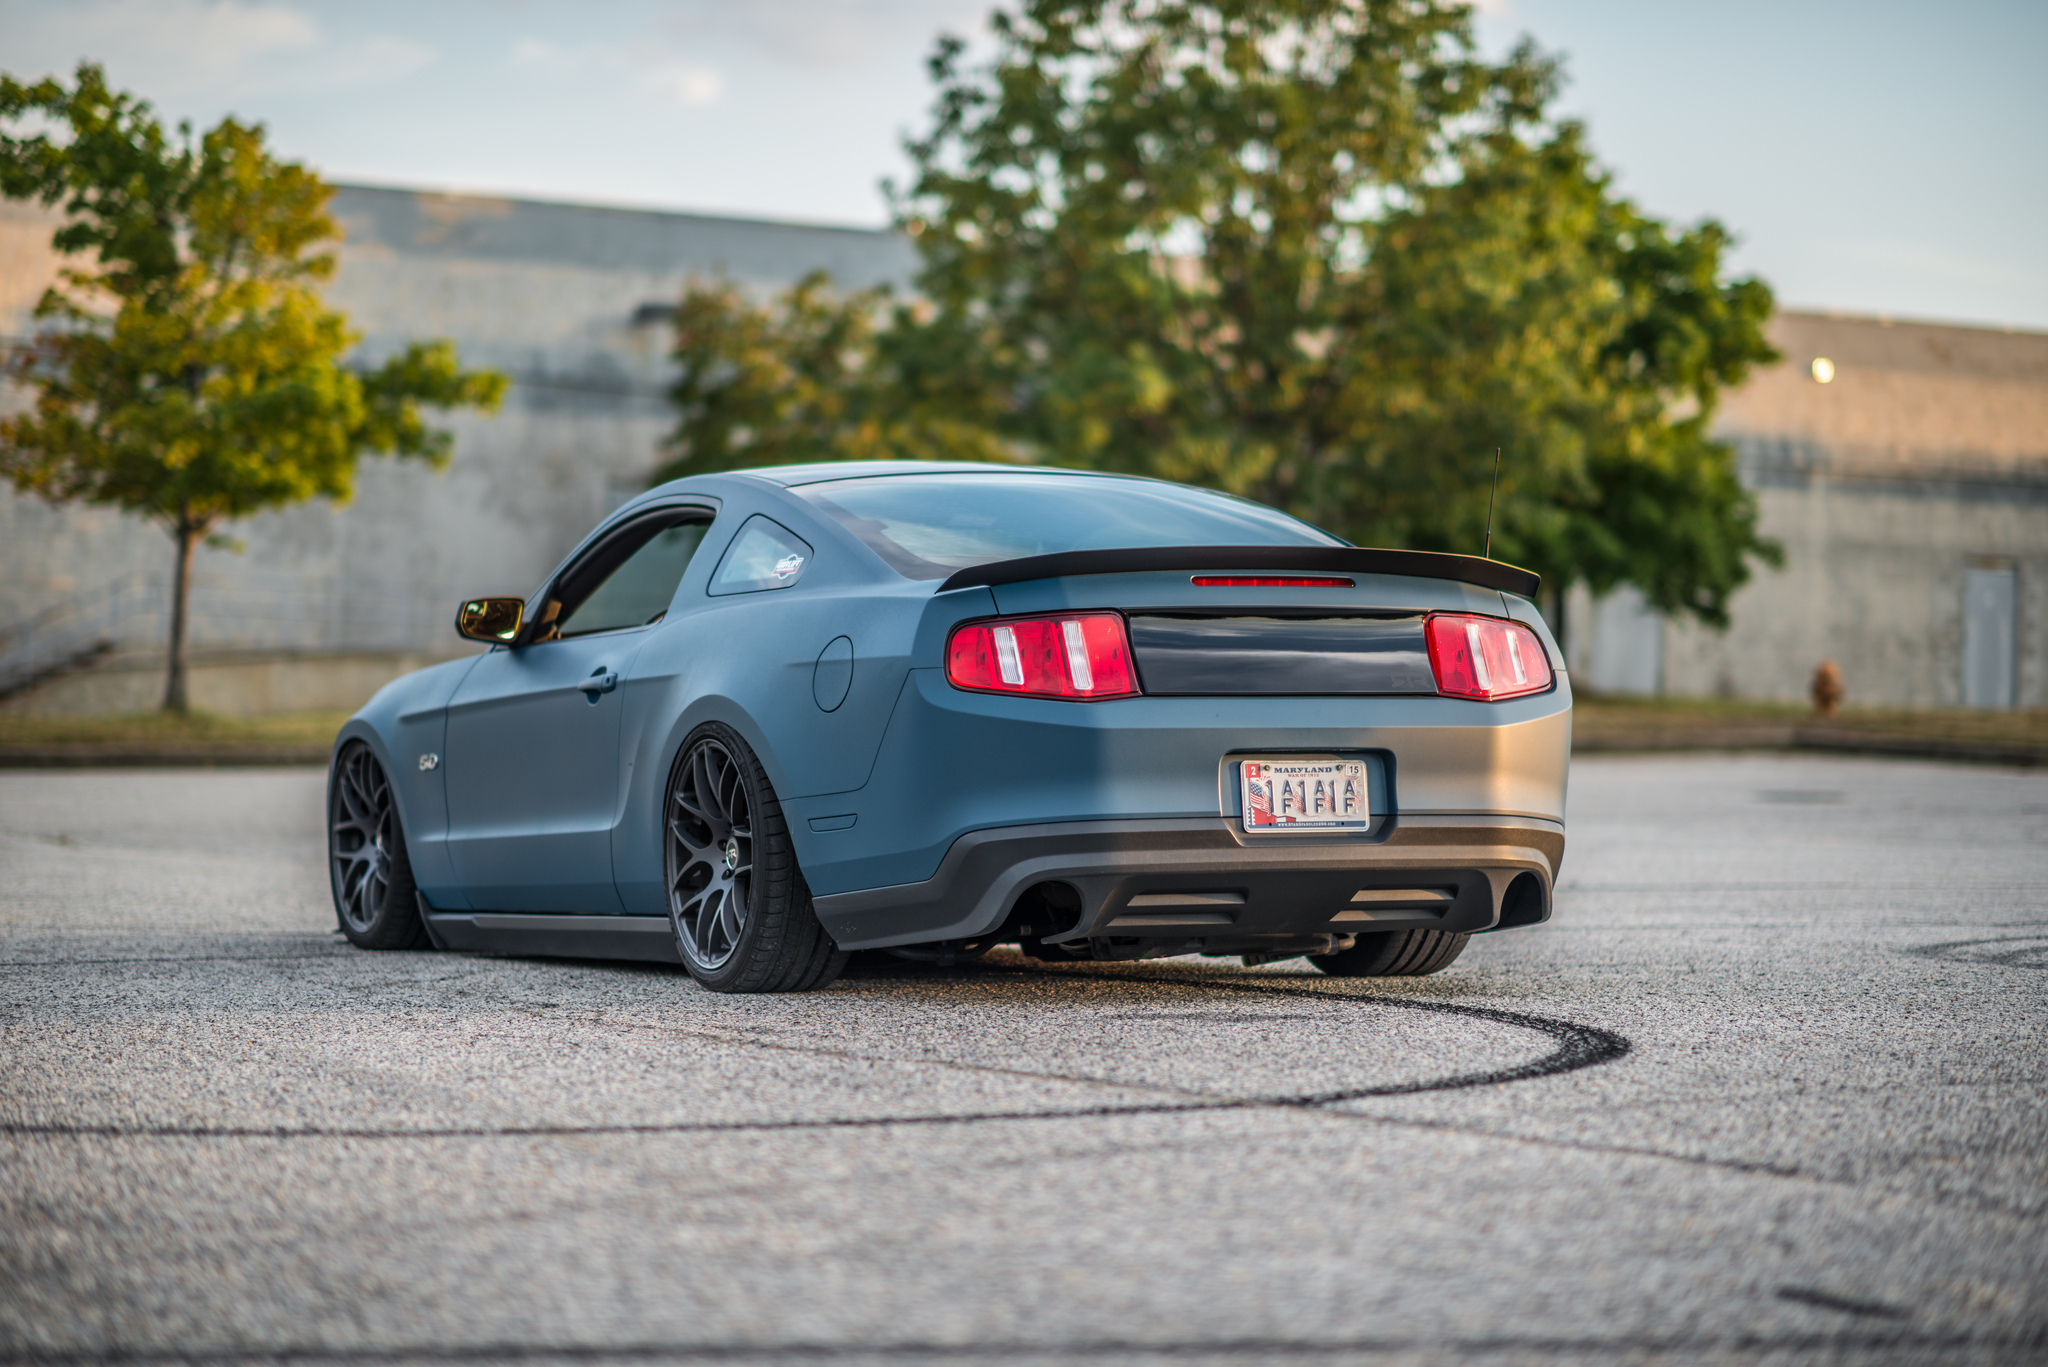 General 2048x1367 Ford Mustang muscle cars tuning car blue cars vehicle Ford Ford Mustang S-197 II American cars